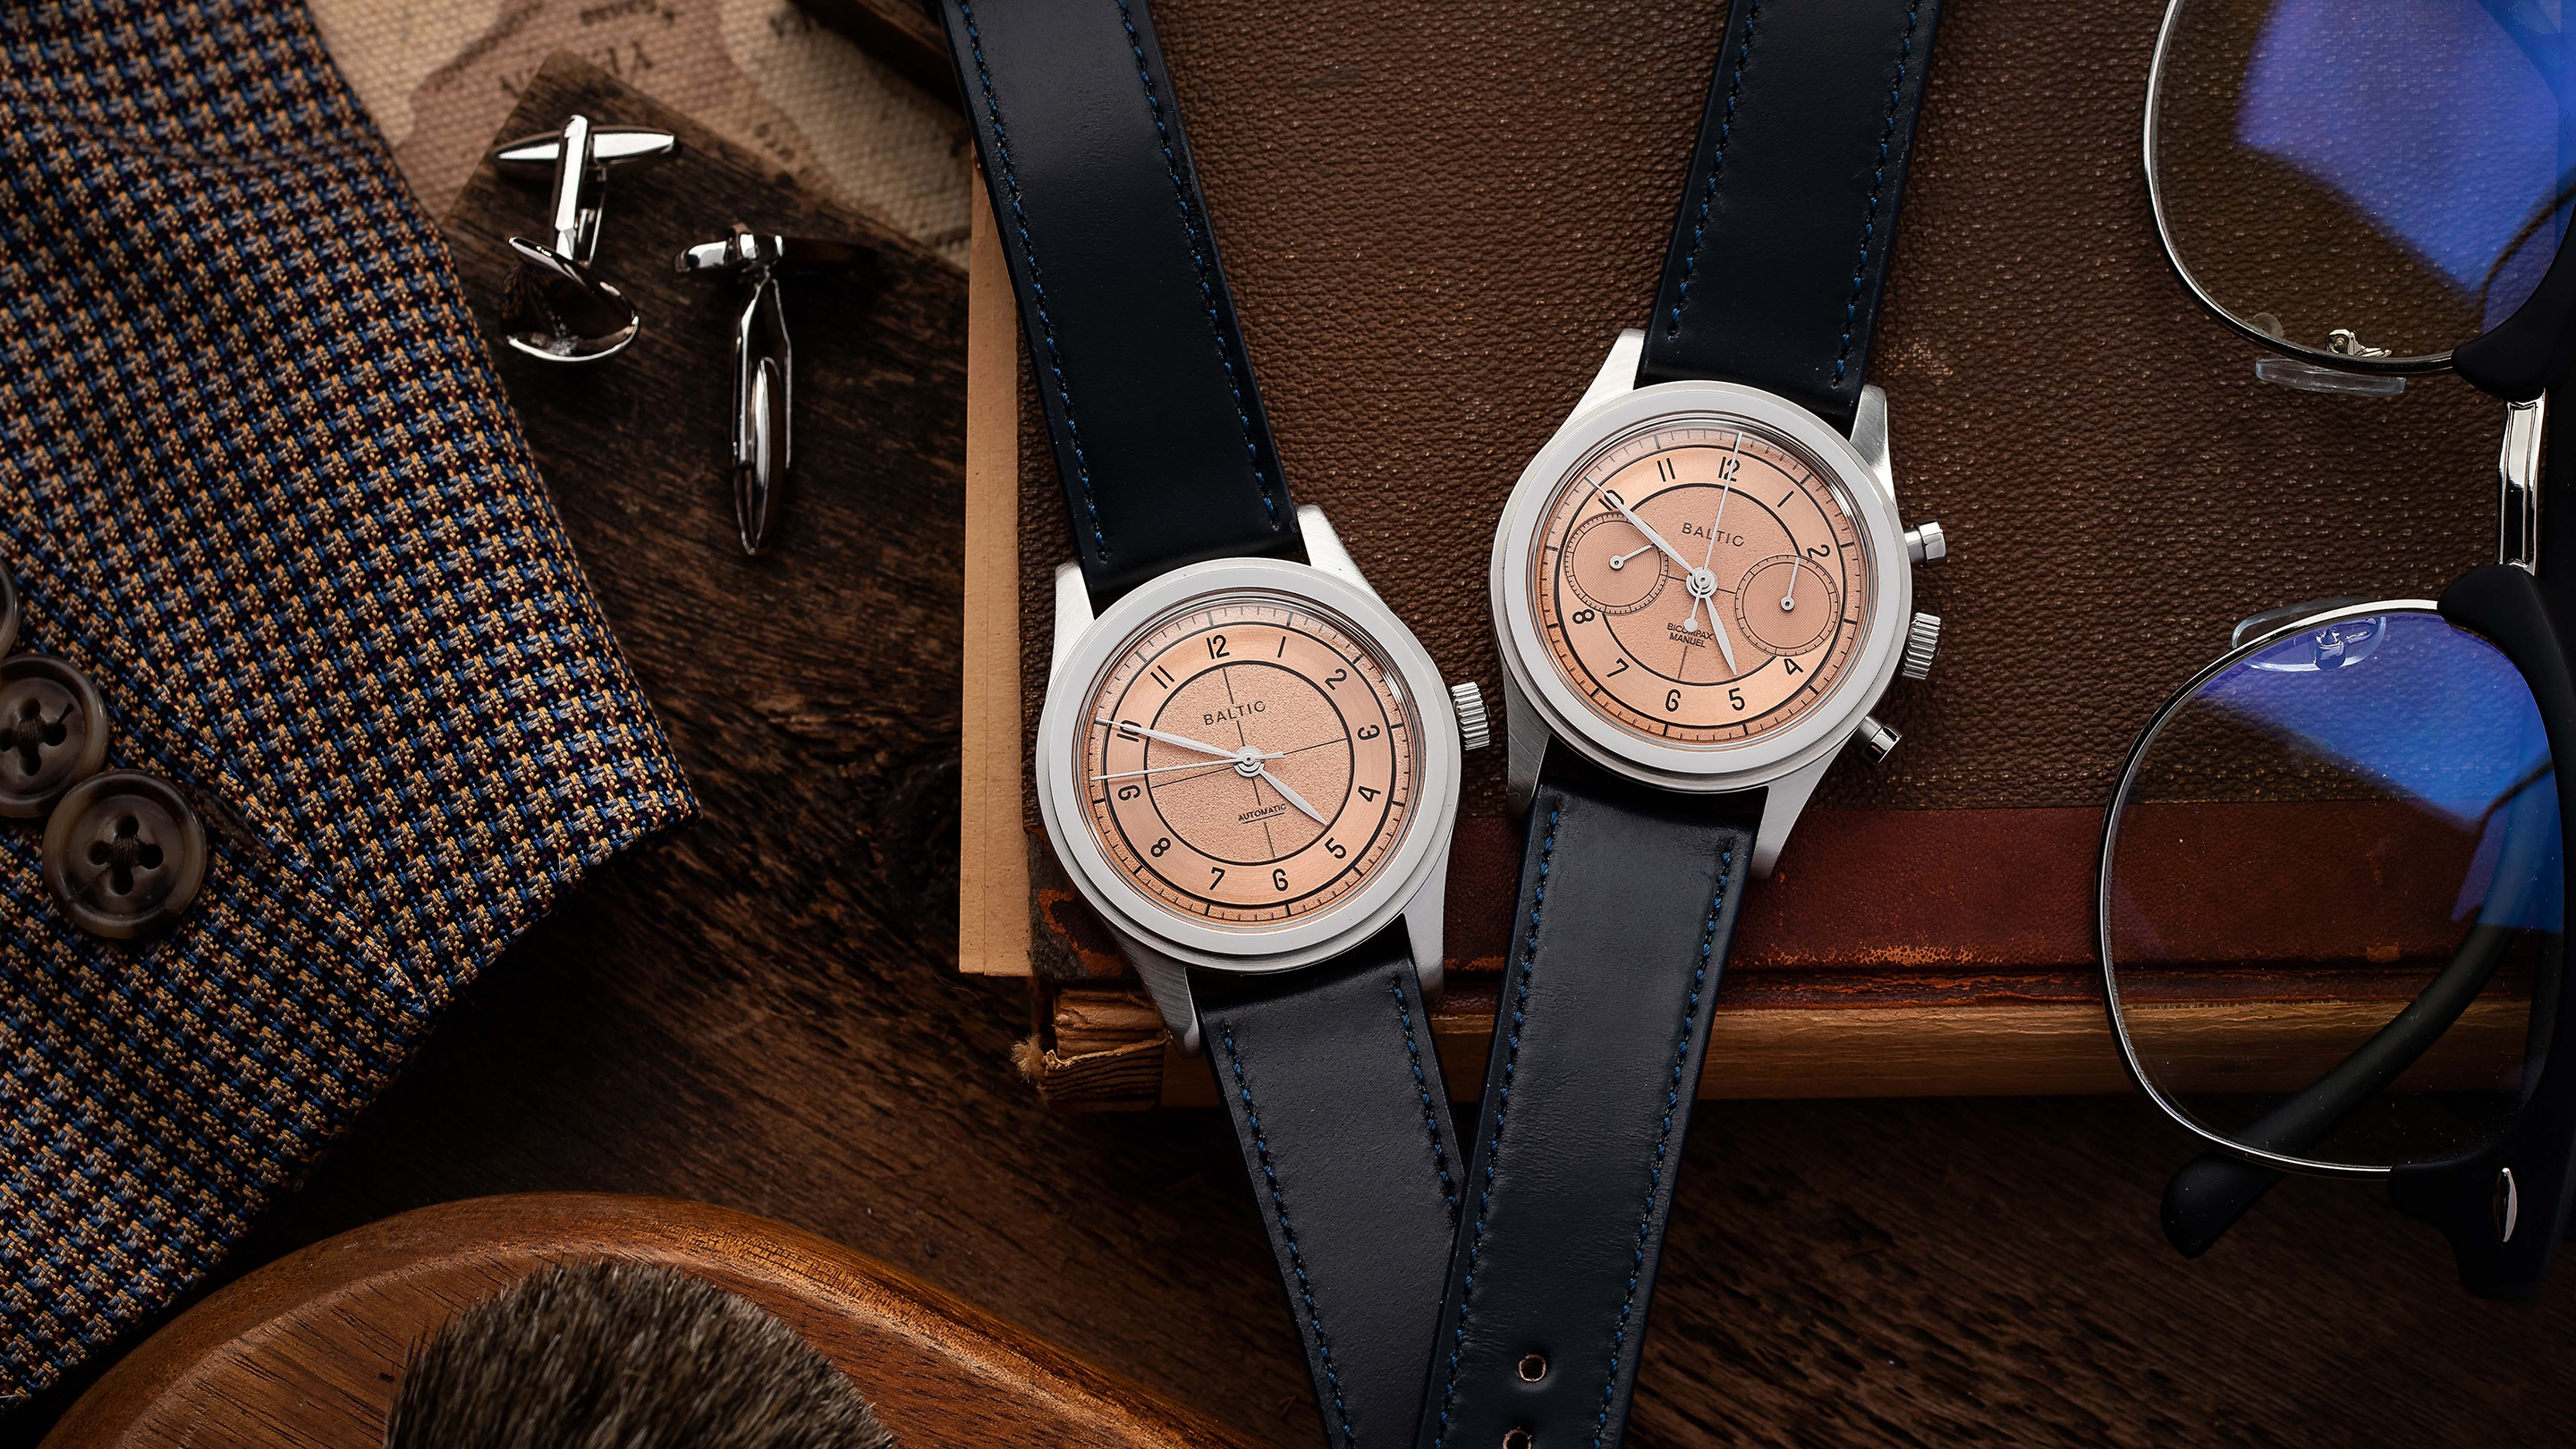 Introducing: The Baltic X Worn & Wound Limited Edition HMS And Bi